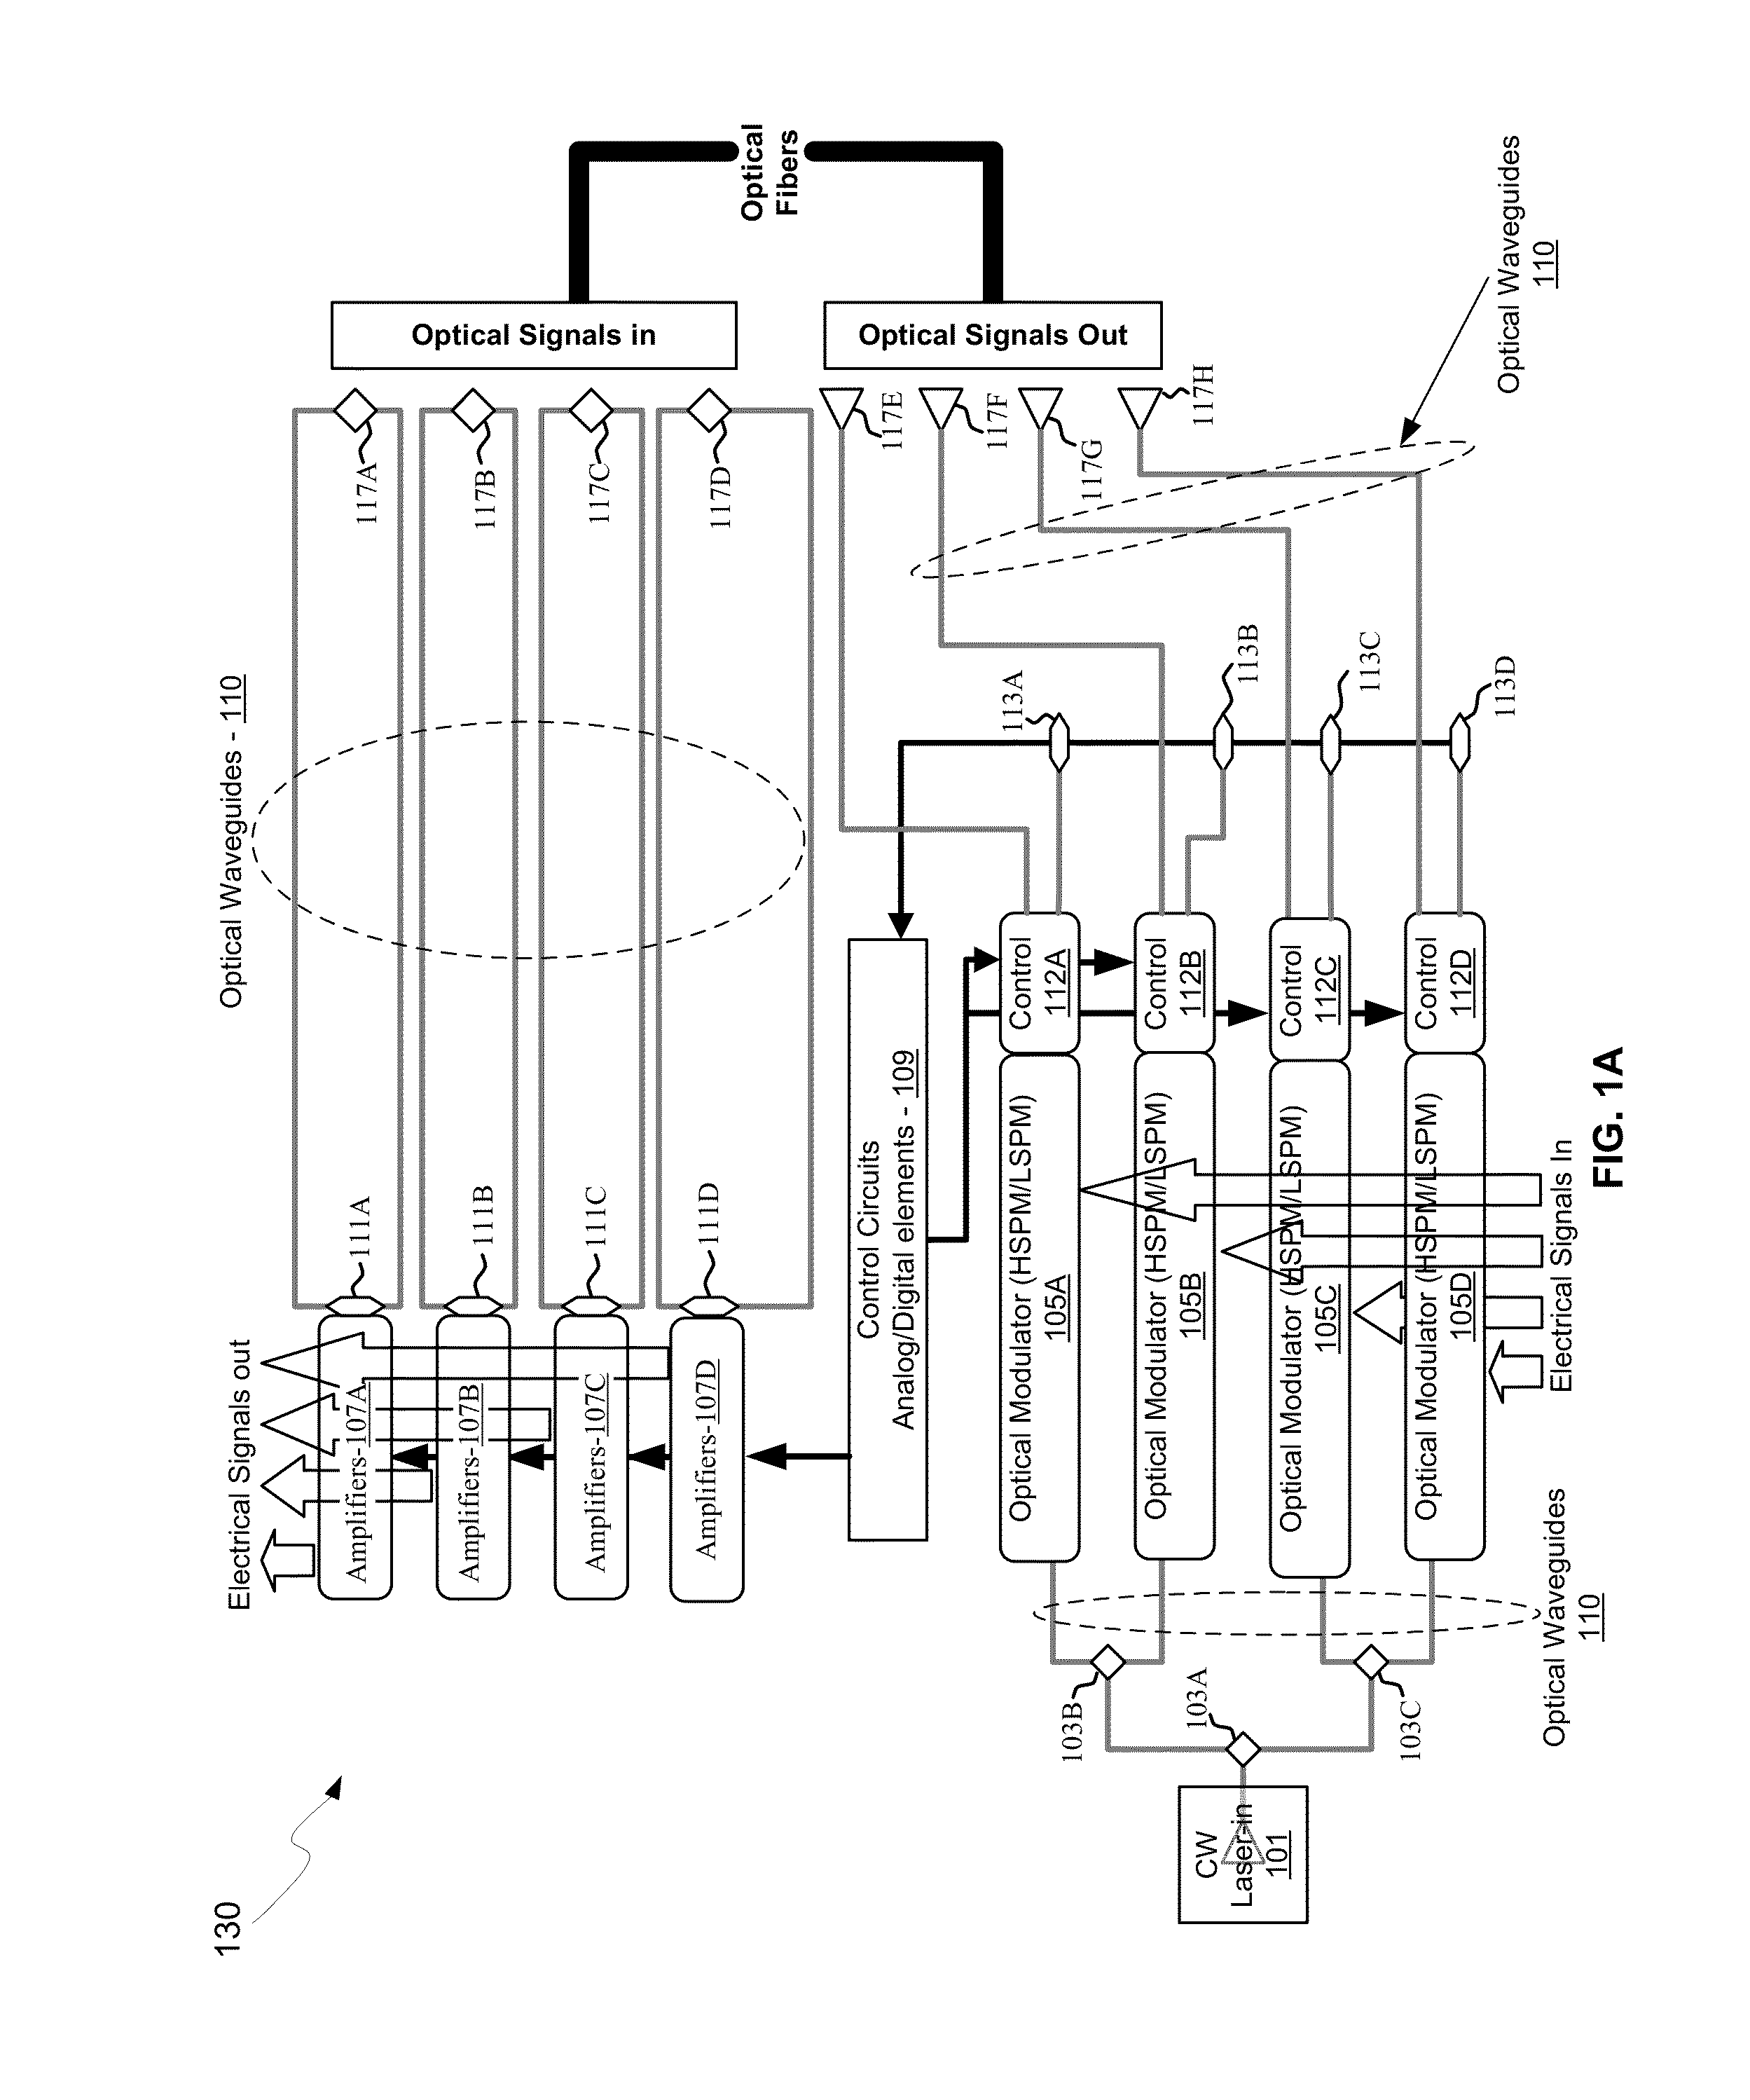 Method And System For Silicon Photonics Wavelength Division Multiplexing Transceivers